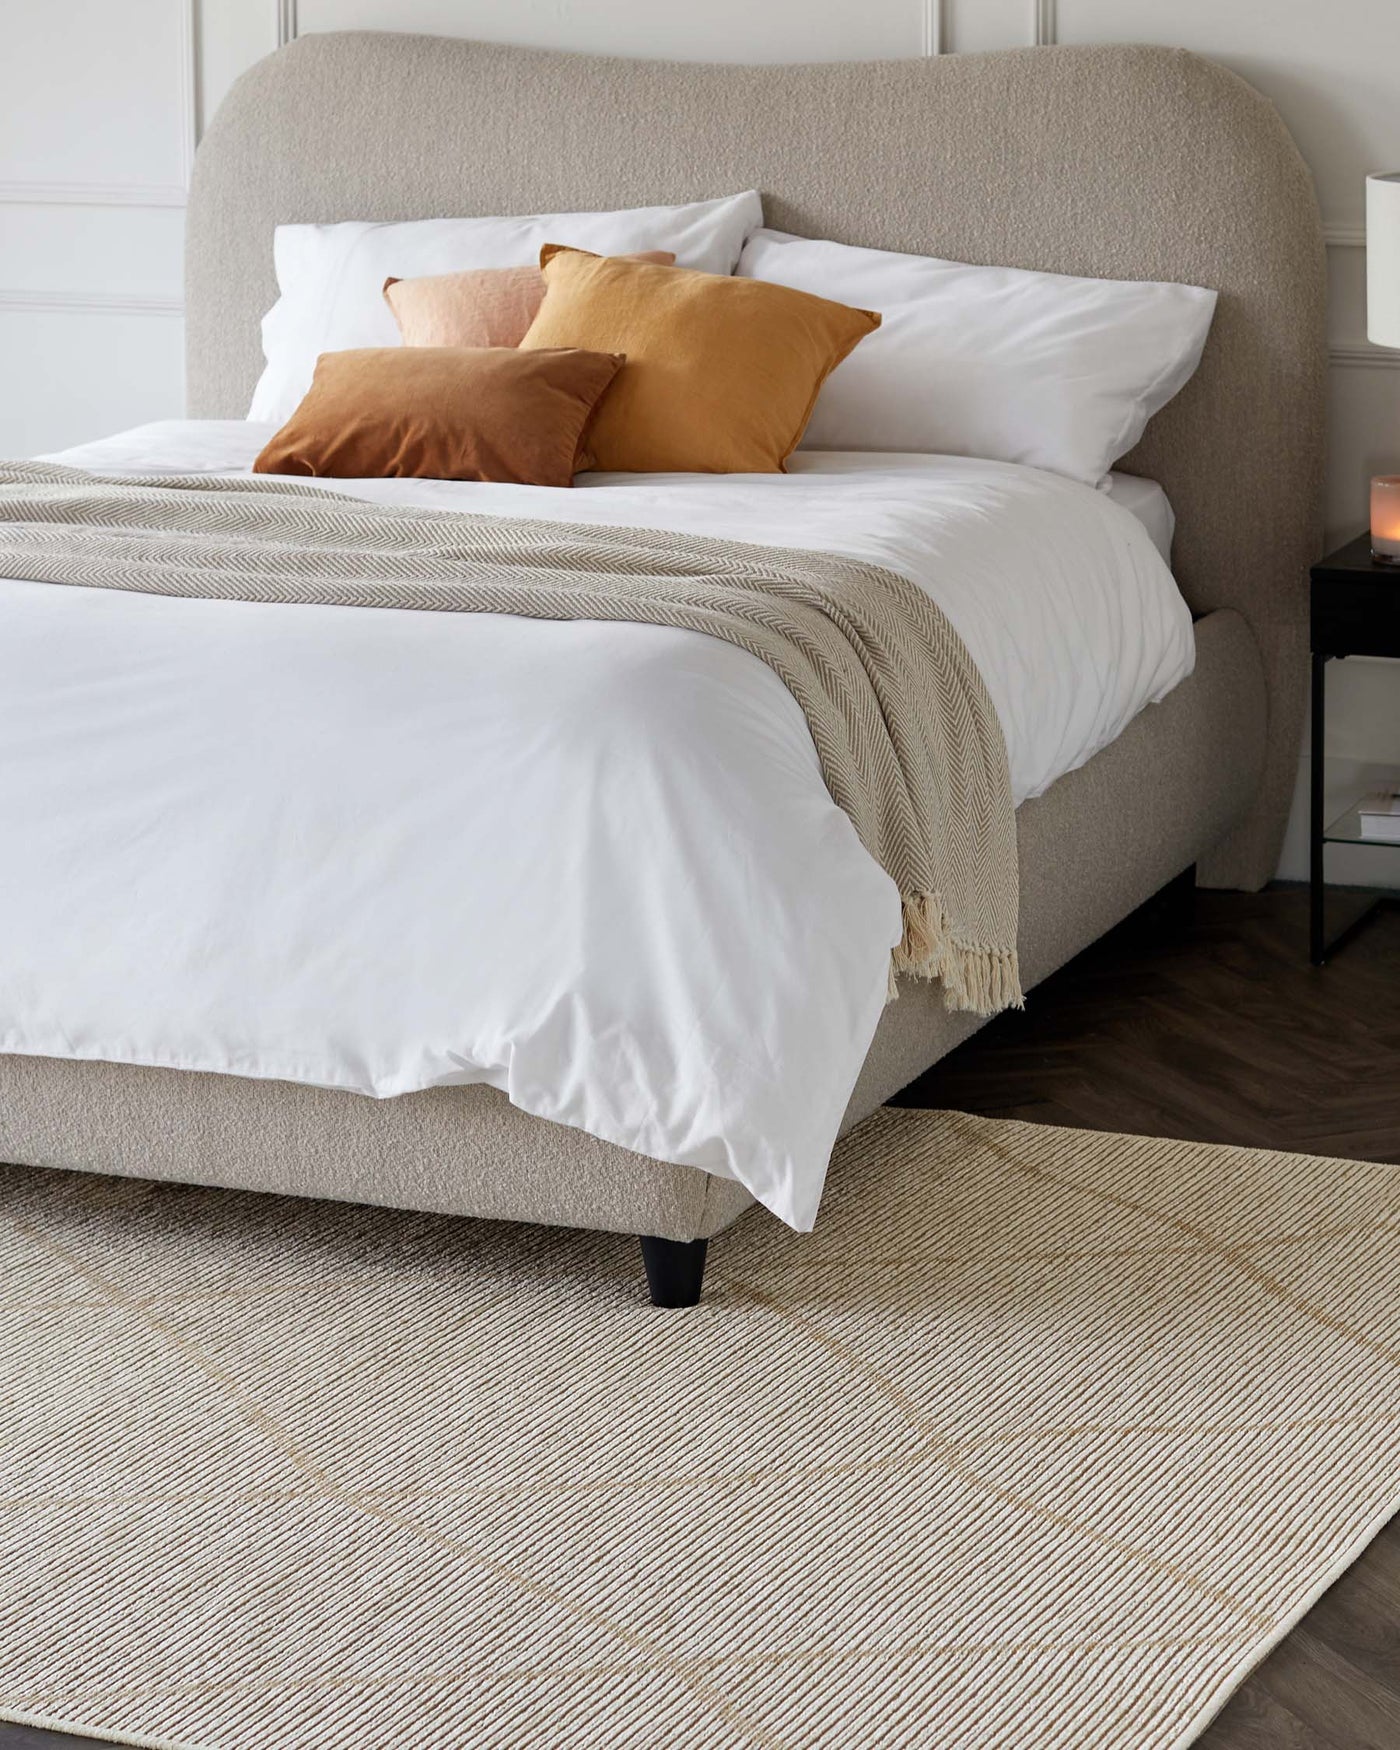 A contemporary upholstered bed with a curved headboard in a neutral beige fabric, featuring clean lines and minimalistic design. Nestled on a textured cream area rug, the bed is adorned with crisp white linens, a beige knit throw, and accent pillows in shades of mustard and terra cotta. A small black nightstand with a white lampshade partially visible, complementing the modern and cosy bedroom aesthetic.